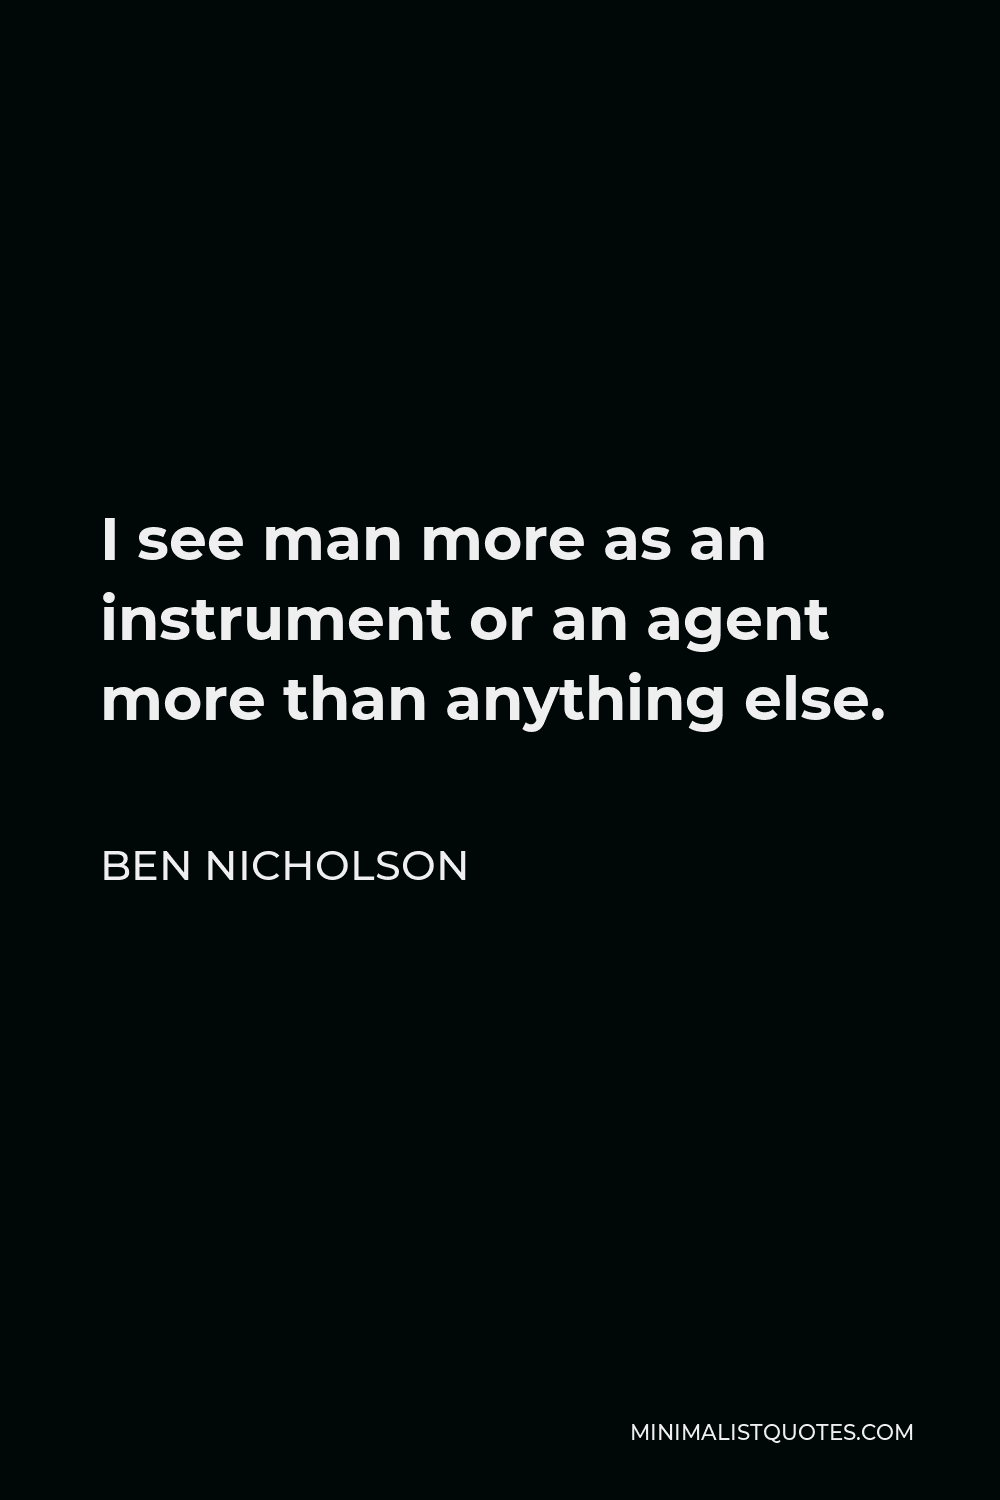 Ben Nicholson Quote - I see man more as an instrument or an agent more than anything else.